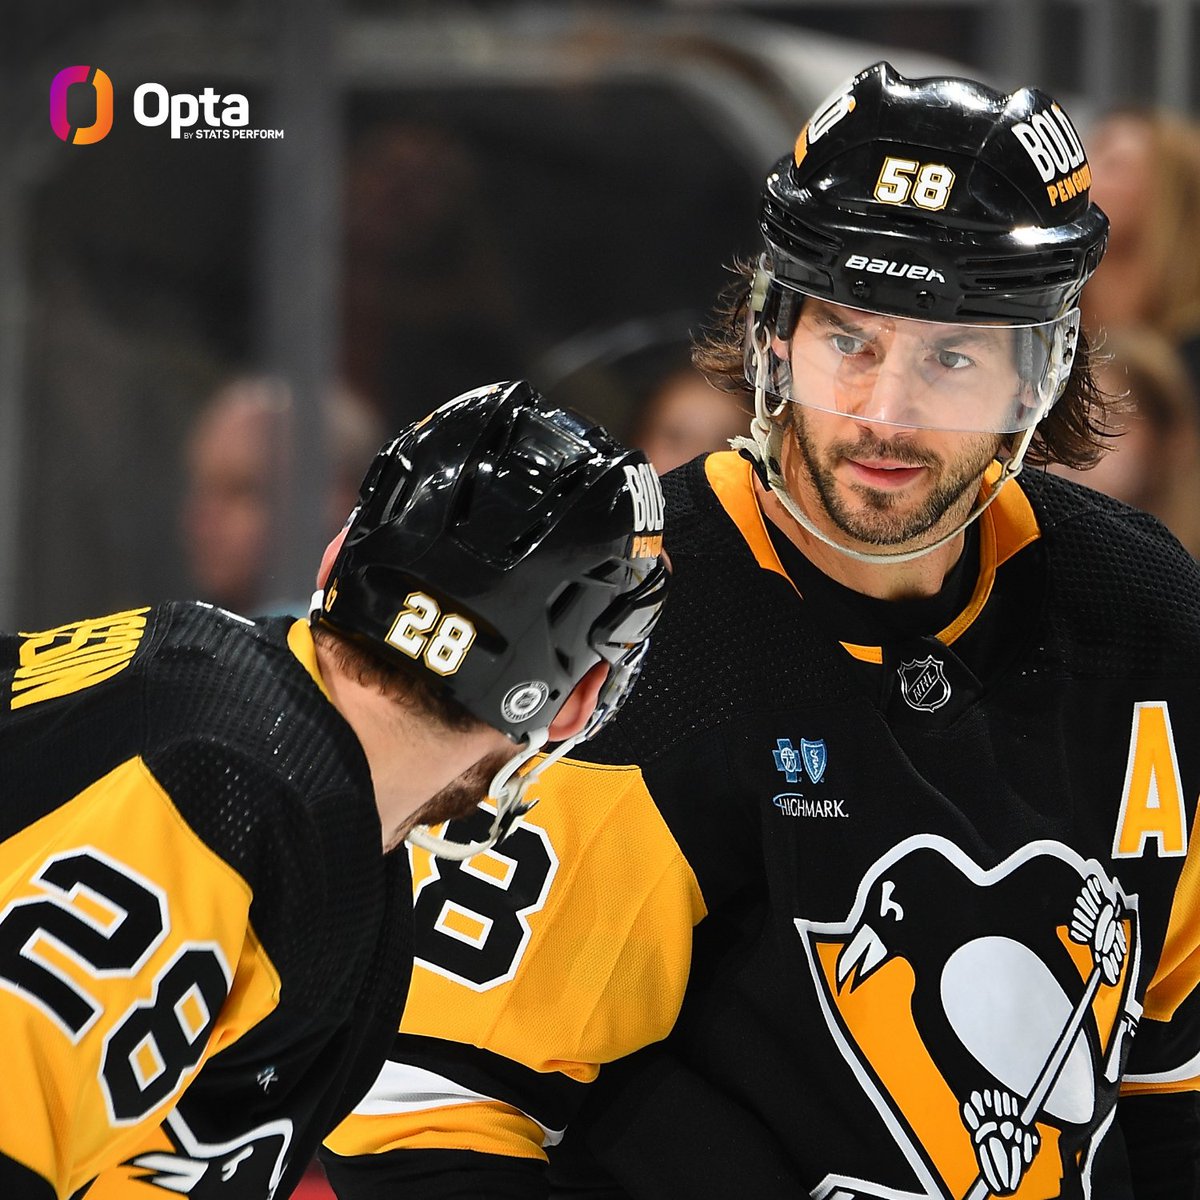 Last night for the @penguins, Kris Letang had six assists while Marcus Pettersson had four. It was the first time in NHL history that two defensemen had 4+ assists in the same game (as teammates or opponents).